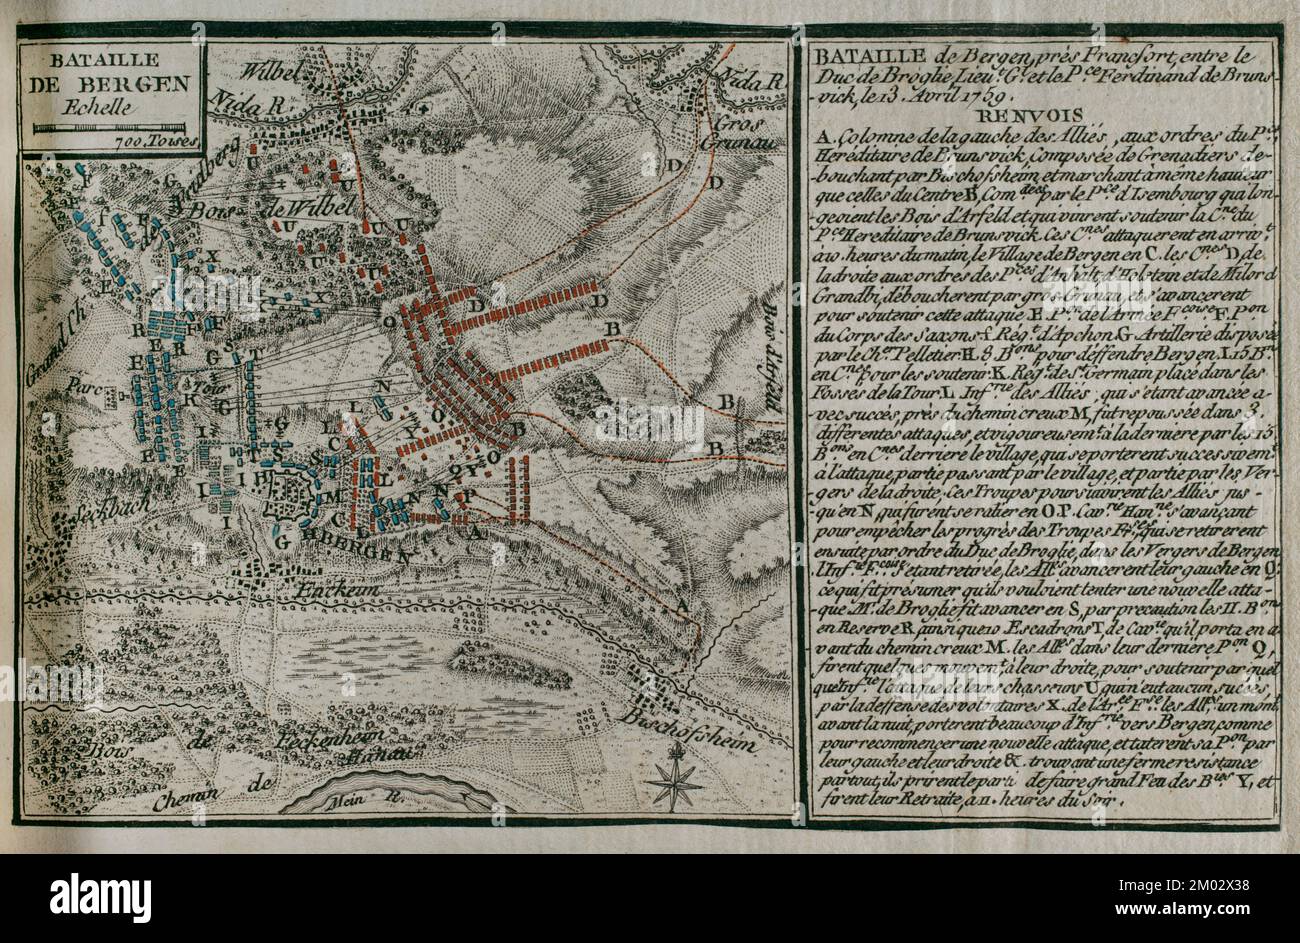 Seven Years War (1756-1763). Map of the Battle of Bergen (April 13, 1759). Confrontation between the Hanoverian troops led by Prince Ferdinand of Brunswick-Luneburg and the French army commanded by Marshal de Broglie, with French victory. Published in 1765 by the cartographer Jean de Beaurain (1696-1771) as an illustration of his Great Map of Germany, with the events that took place during the Seven Years War. Allied army in red and the French army in blue. Engraving. French edition, 1765. Military Historical Library of Barcelona (Biblioteca Histórico Militar de Barcelona). Catalonia. Spain. Stock Photo